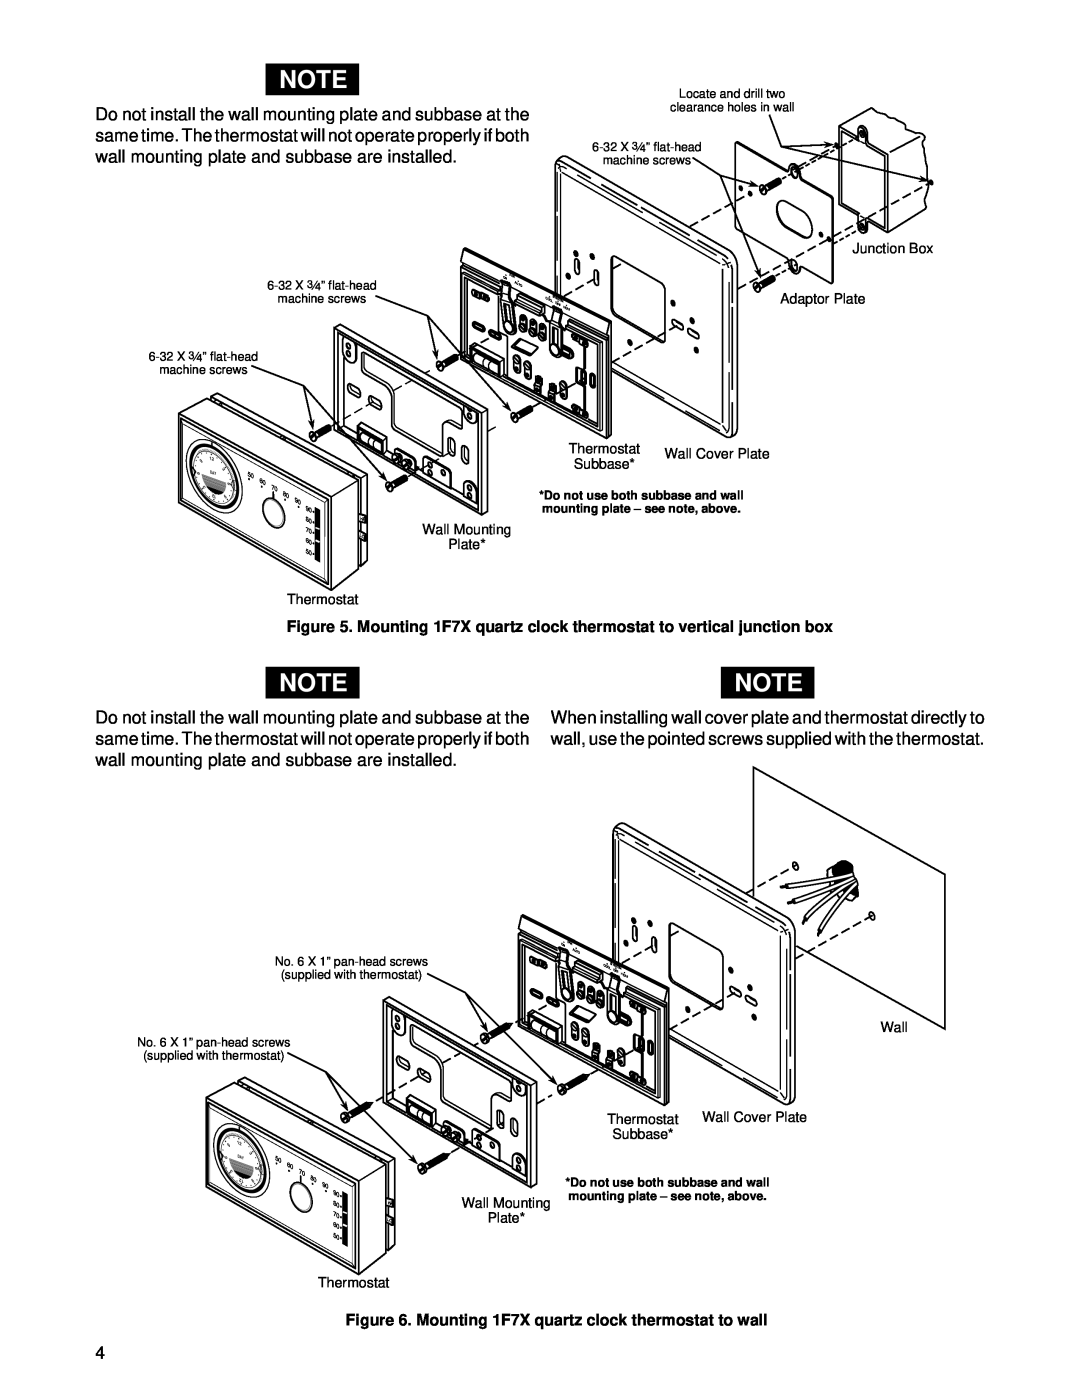 White Rodgers 37-5148B installation instructions 